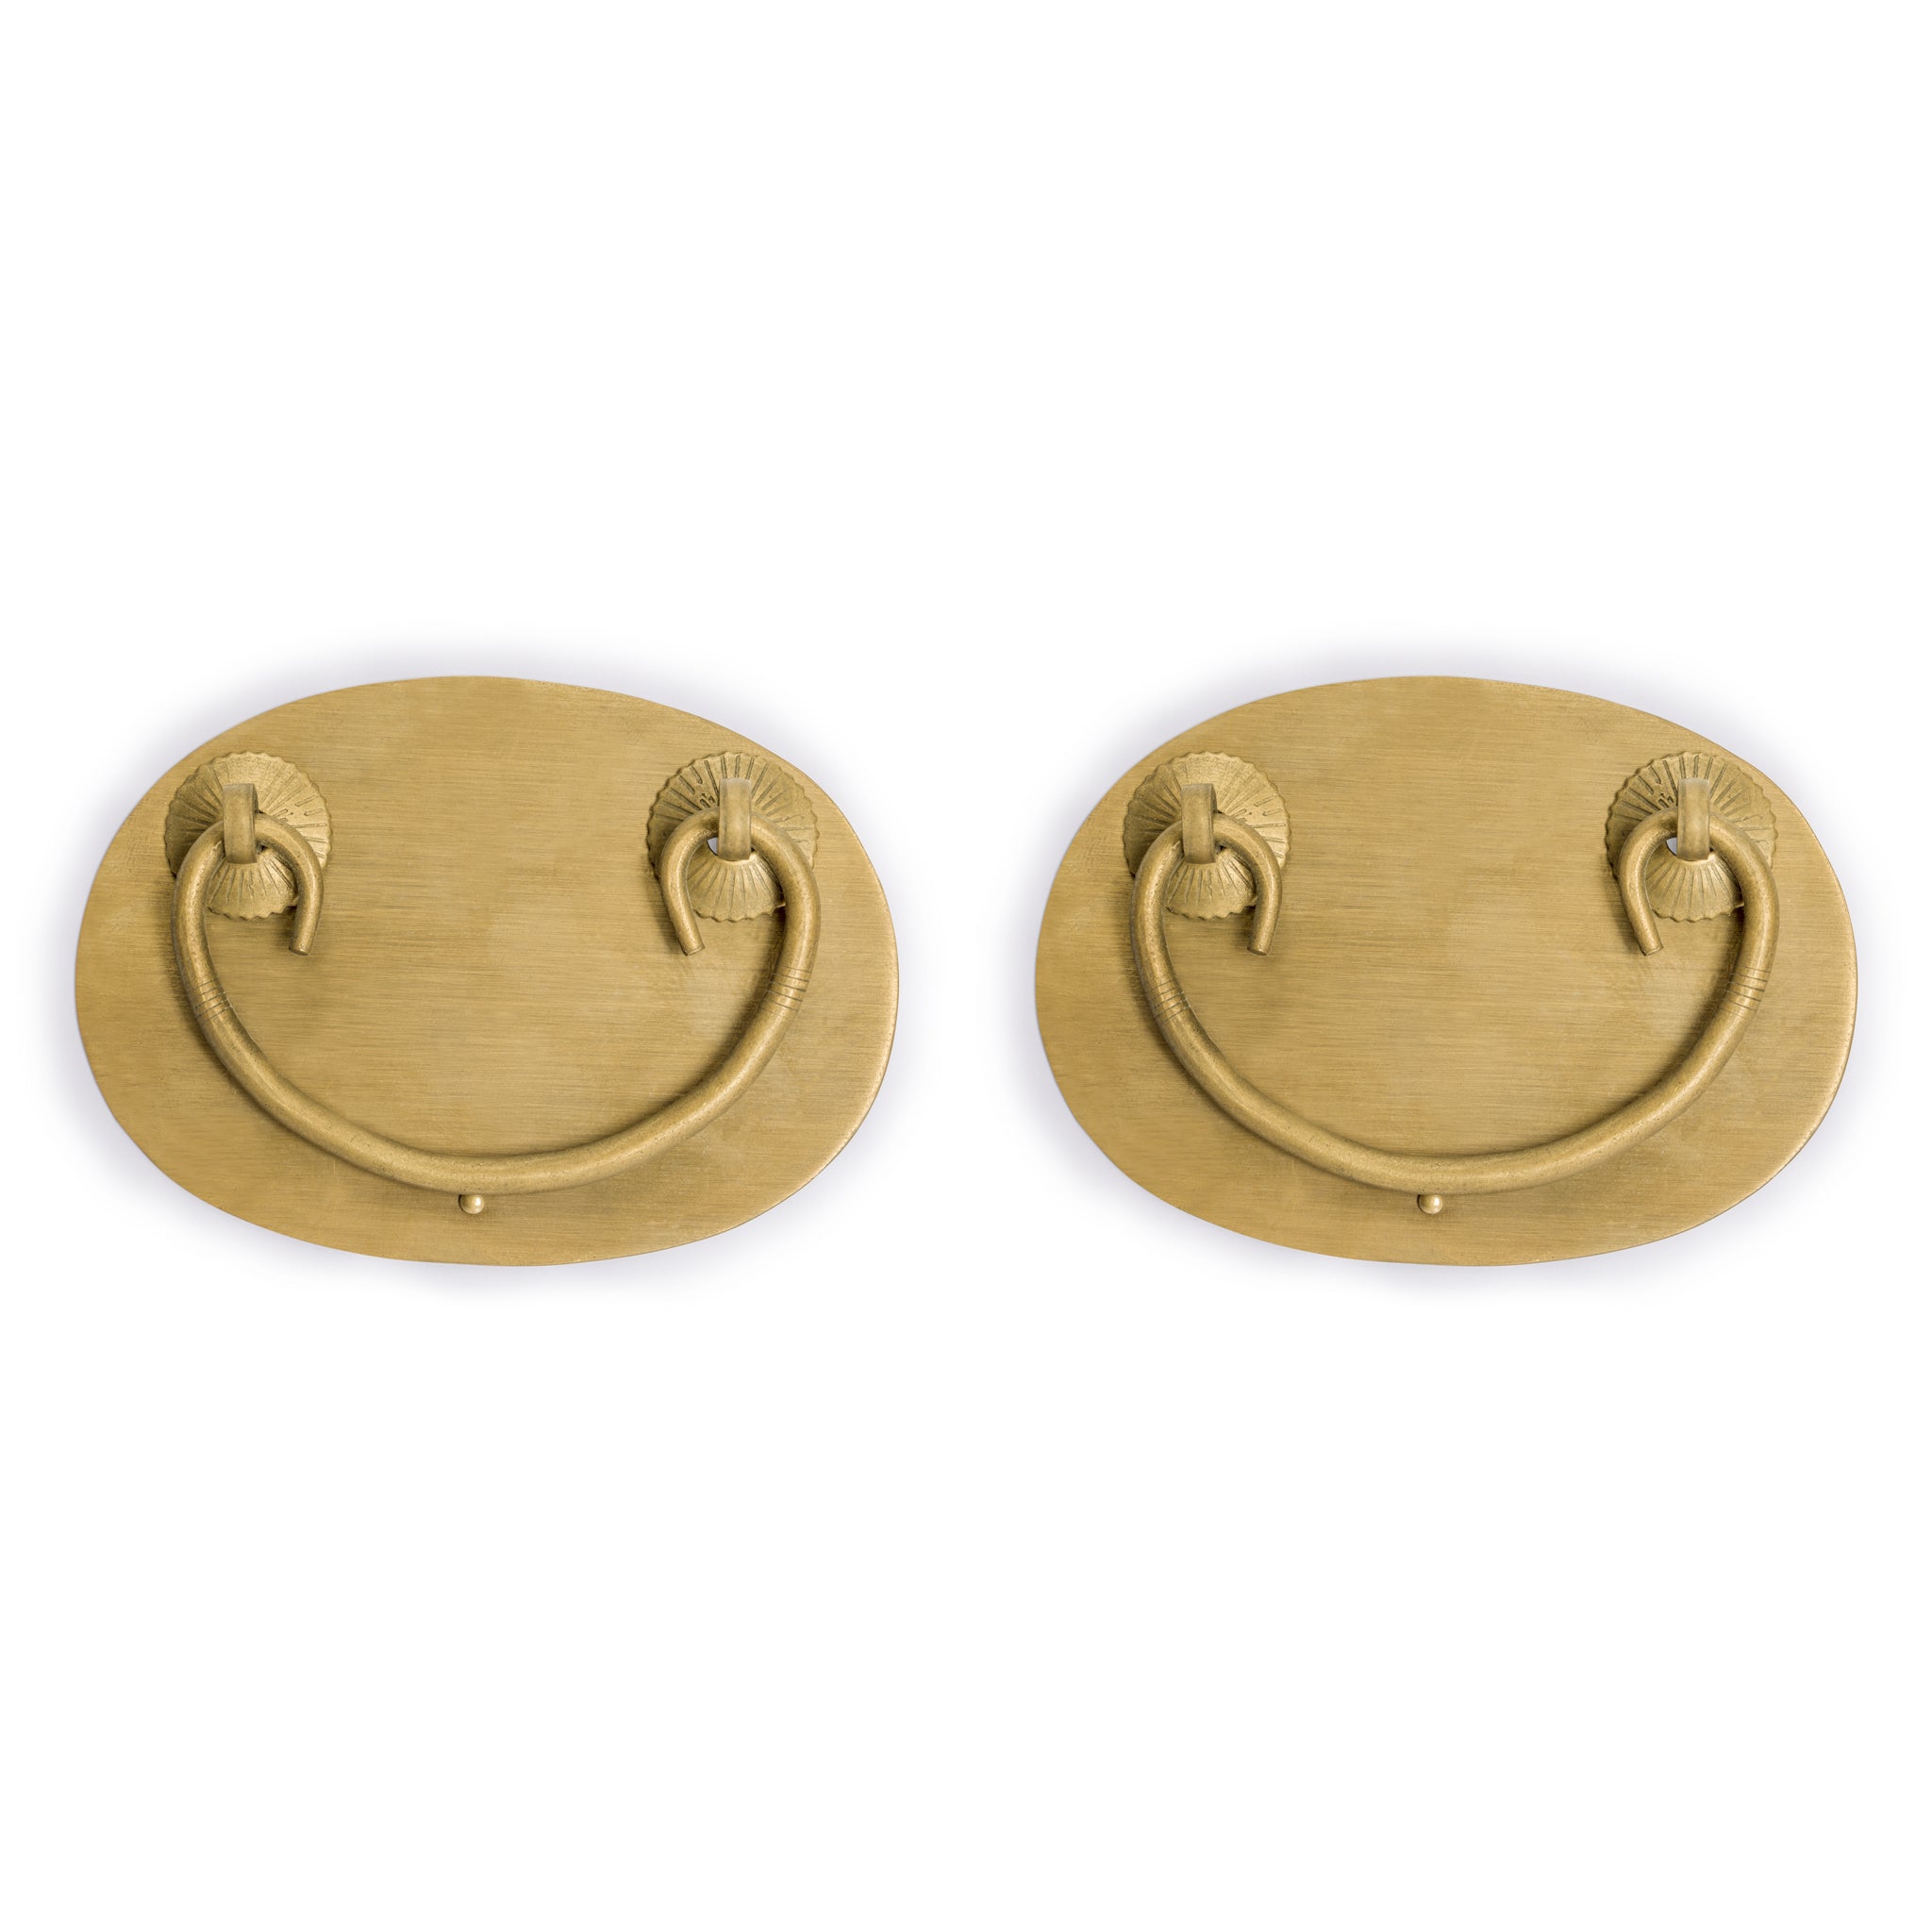 Oval Handle Pulls 4" - Set of 2-Chinese Brass Hardware